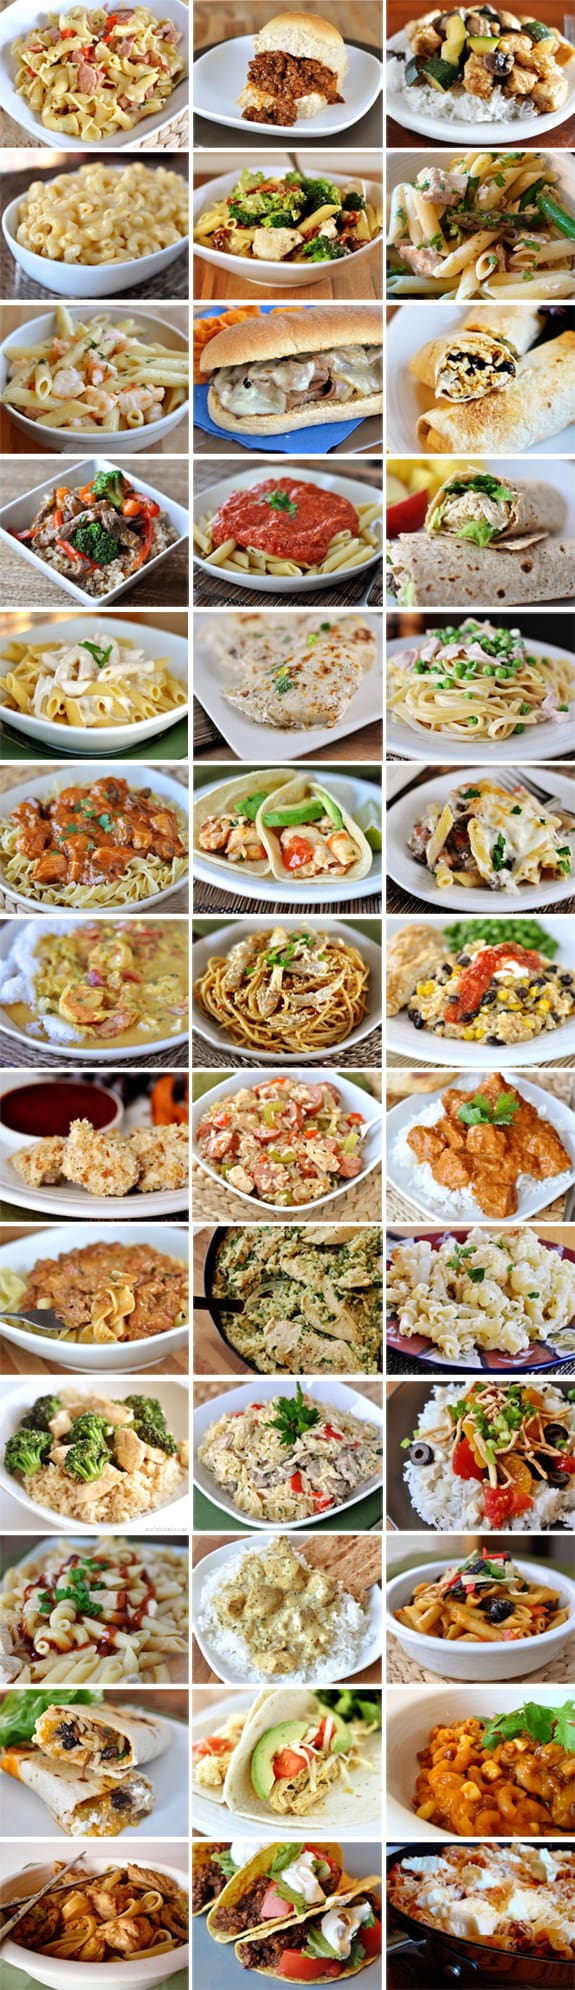 39 meals to make in 30-minutes or less